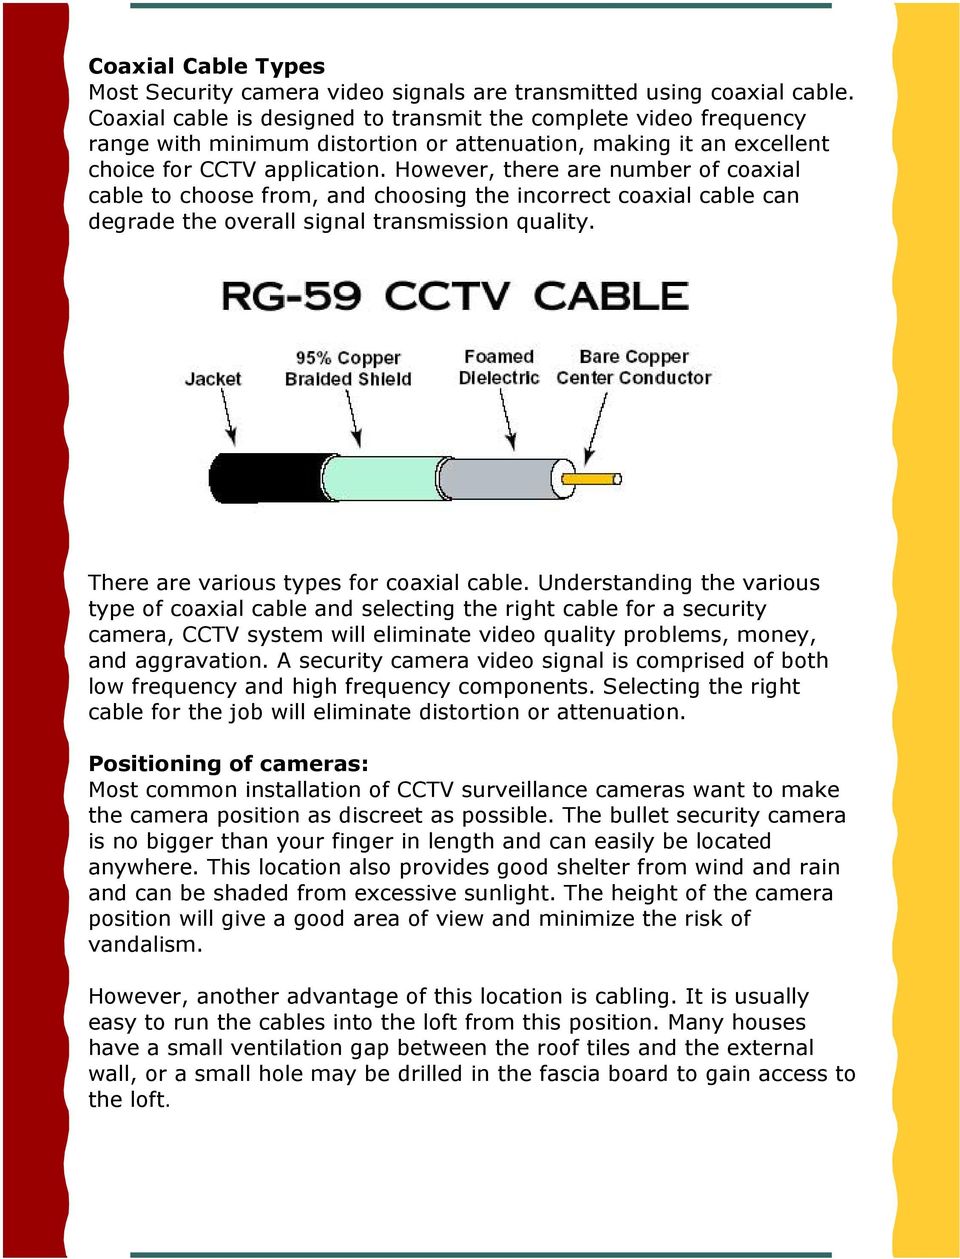 However, there are number of coaxial cable to choose from, and choosing the incorrect coaxial cable can degrade the overall signal transmission quality. There are various types for coaxial cable.